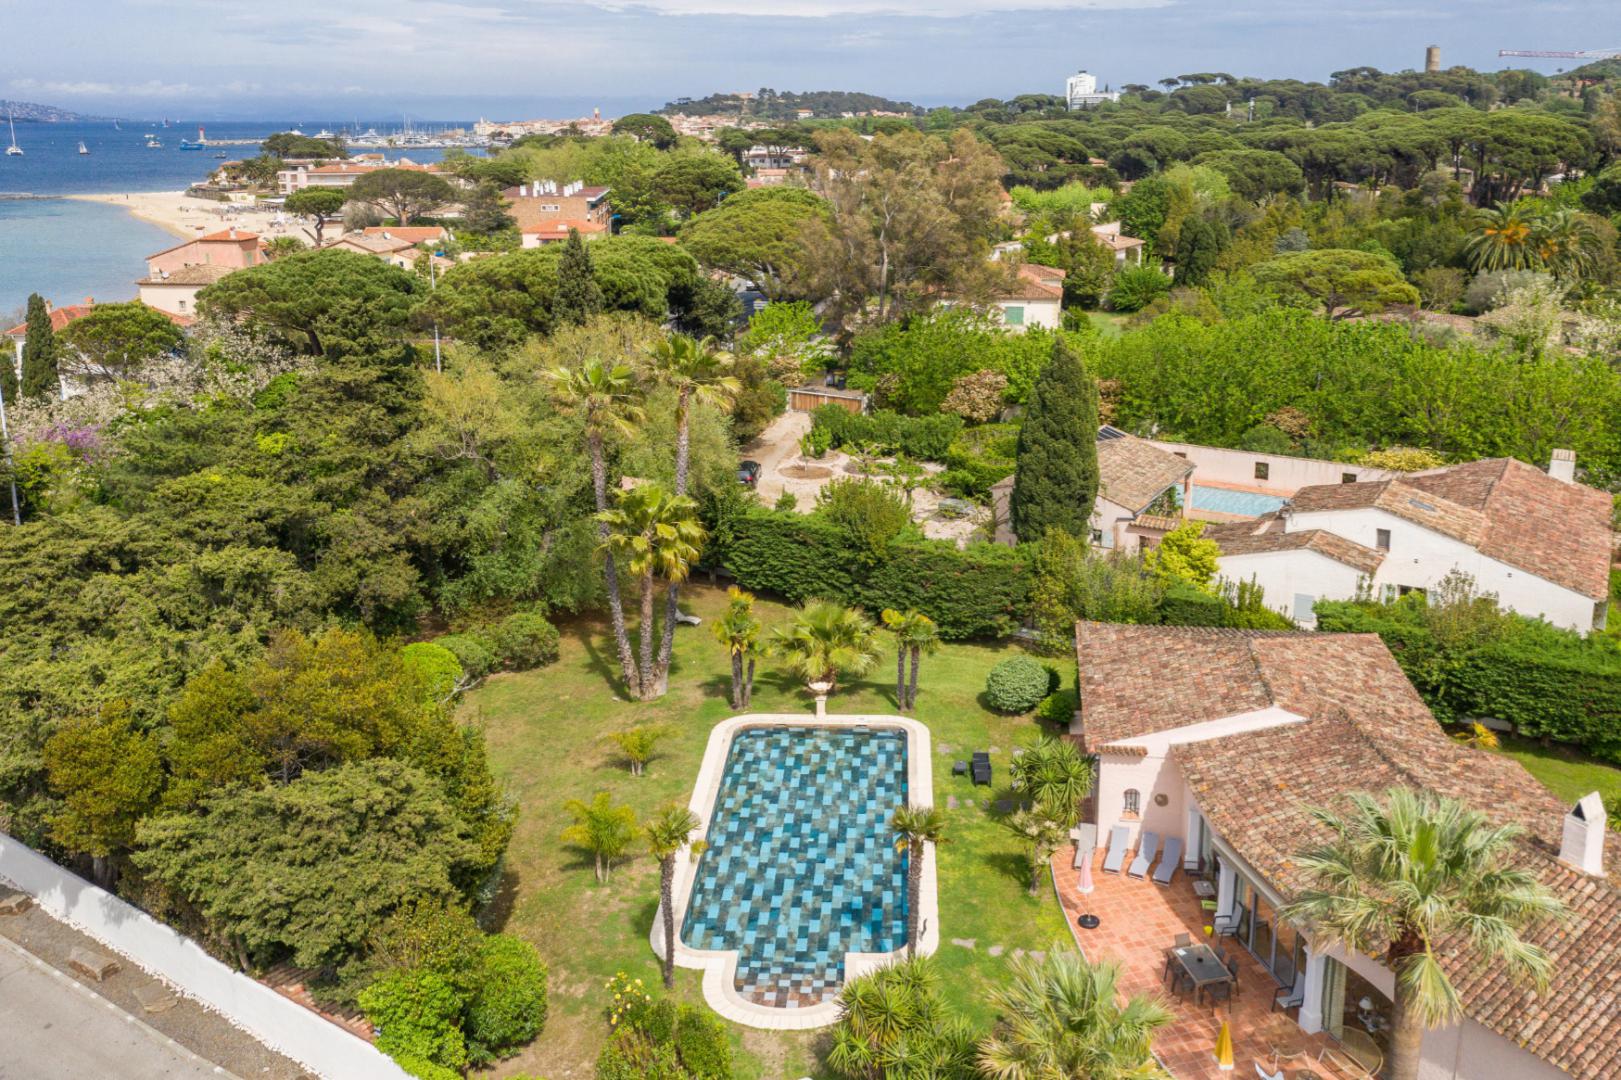 Vacation rentals in Saint-Tropez and bed and breakfast at the Villa ...